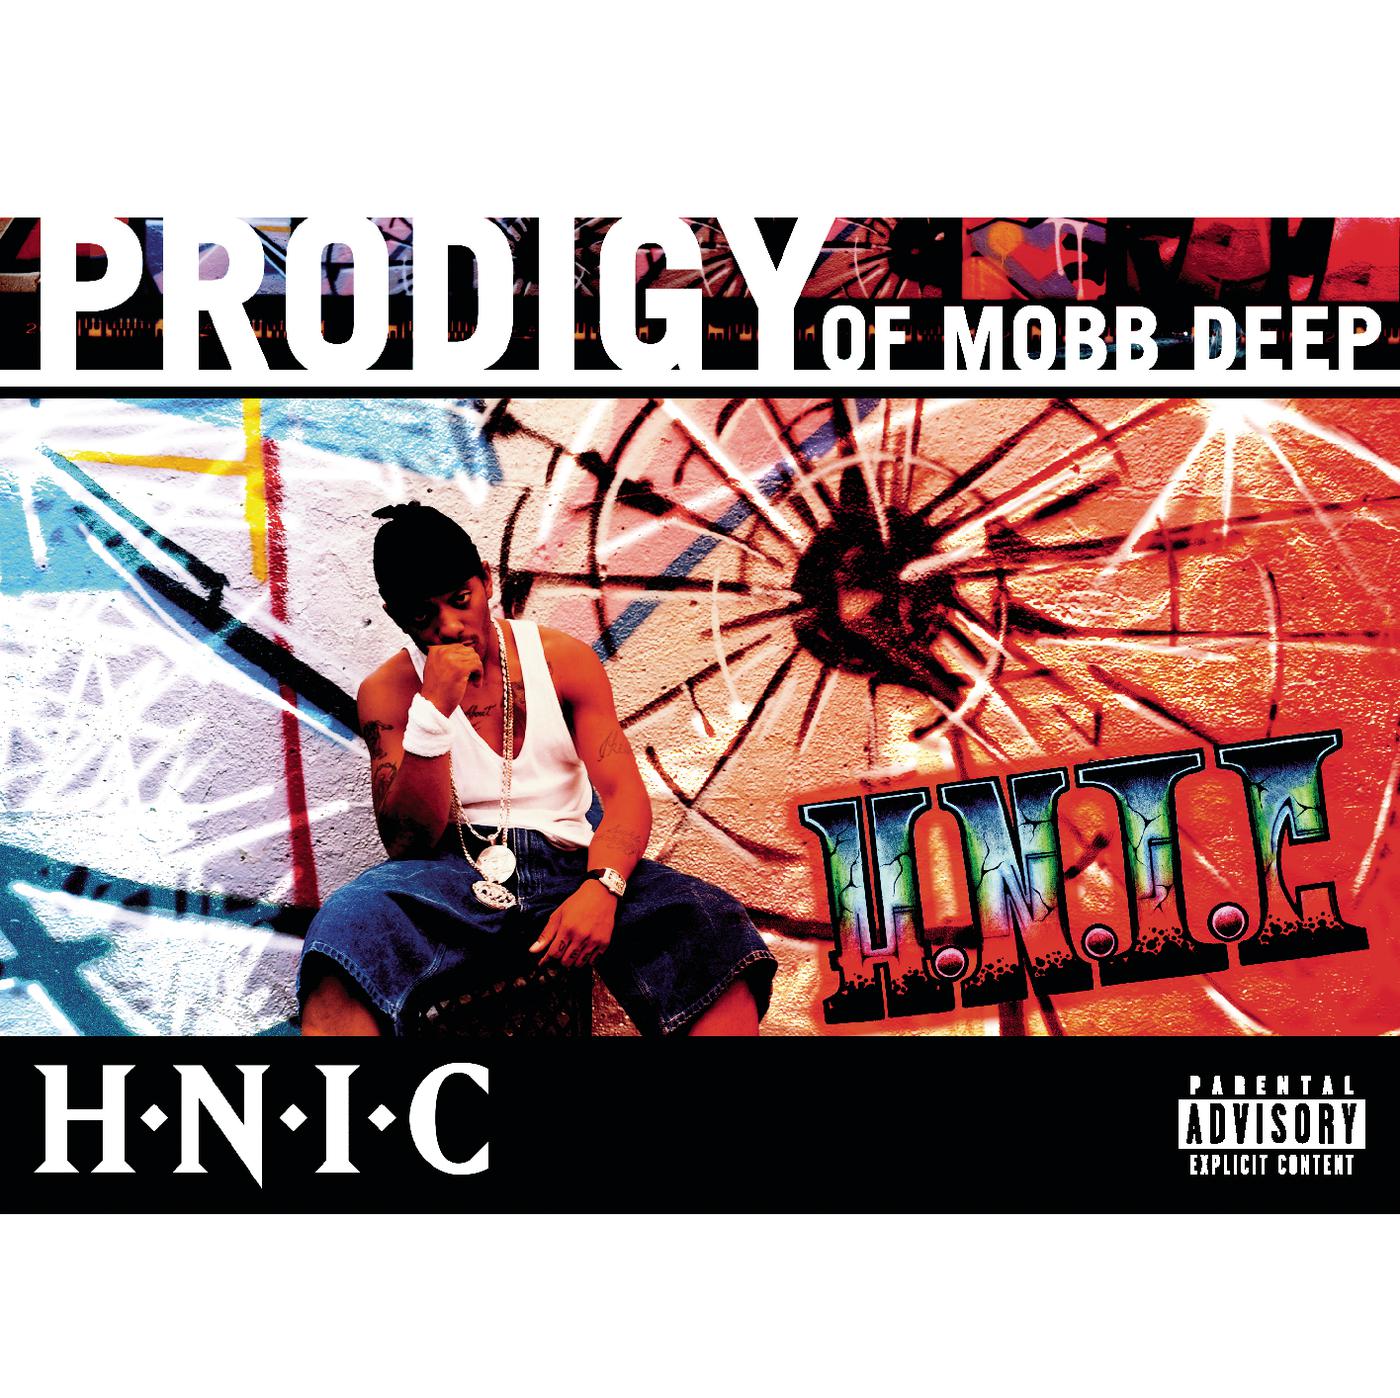 Prodigy of Mobb Deep - You Can Never Feel My Pain